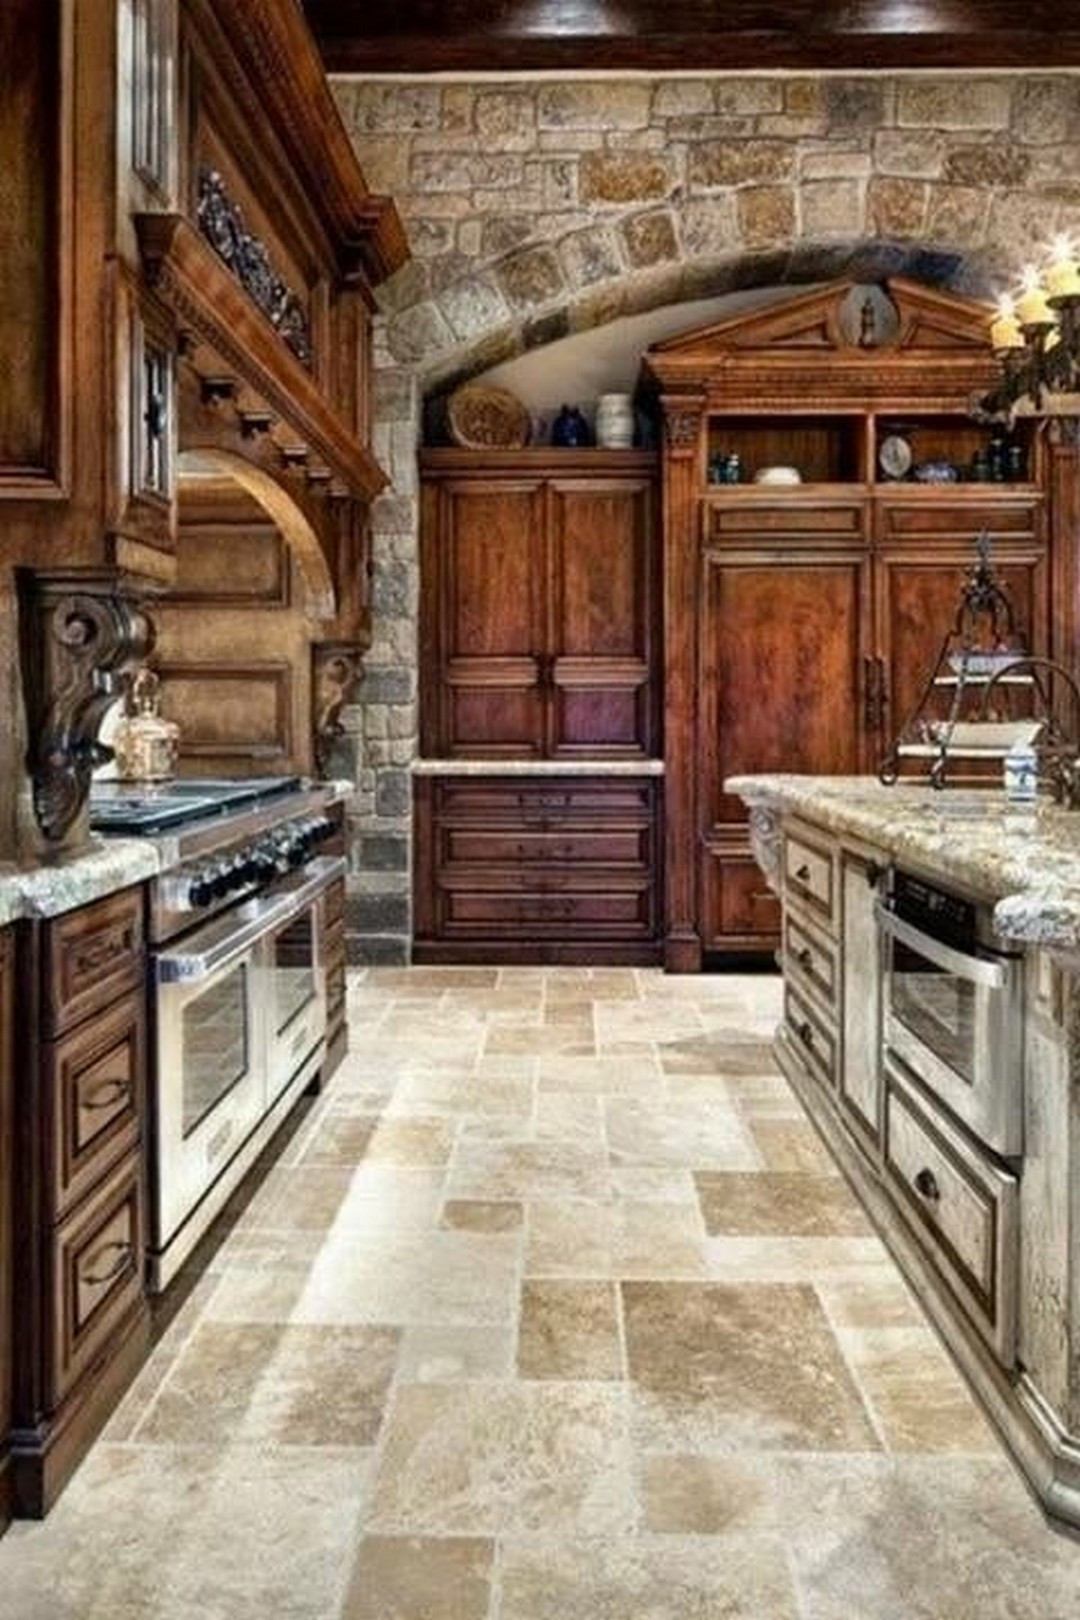 Rustic Kitchen Colors
 Renew your Ordinary Kitchen with These Inspiring Rustic